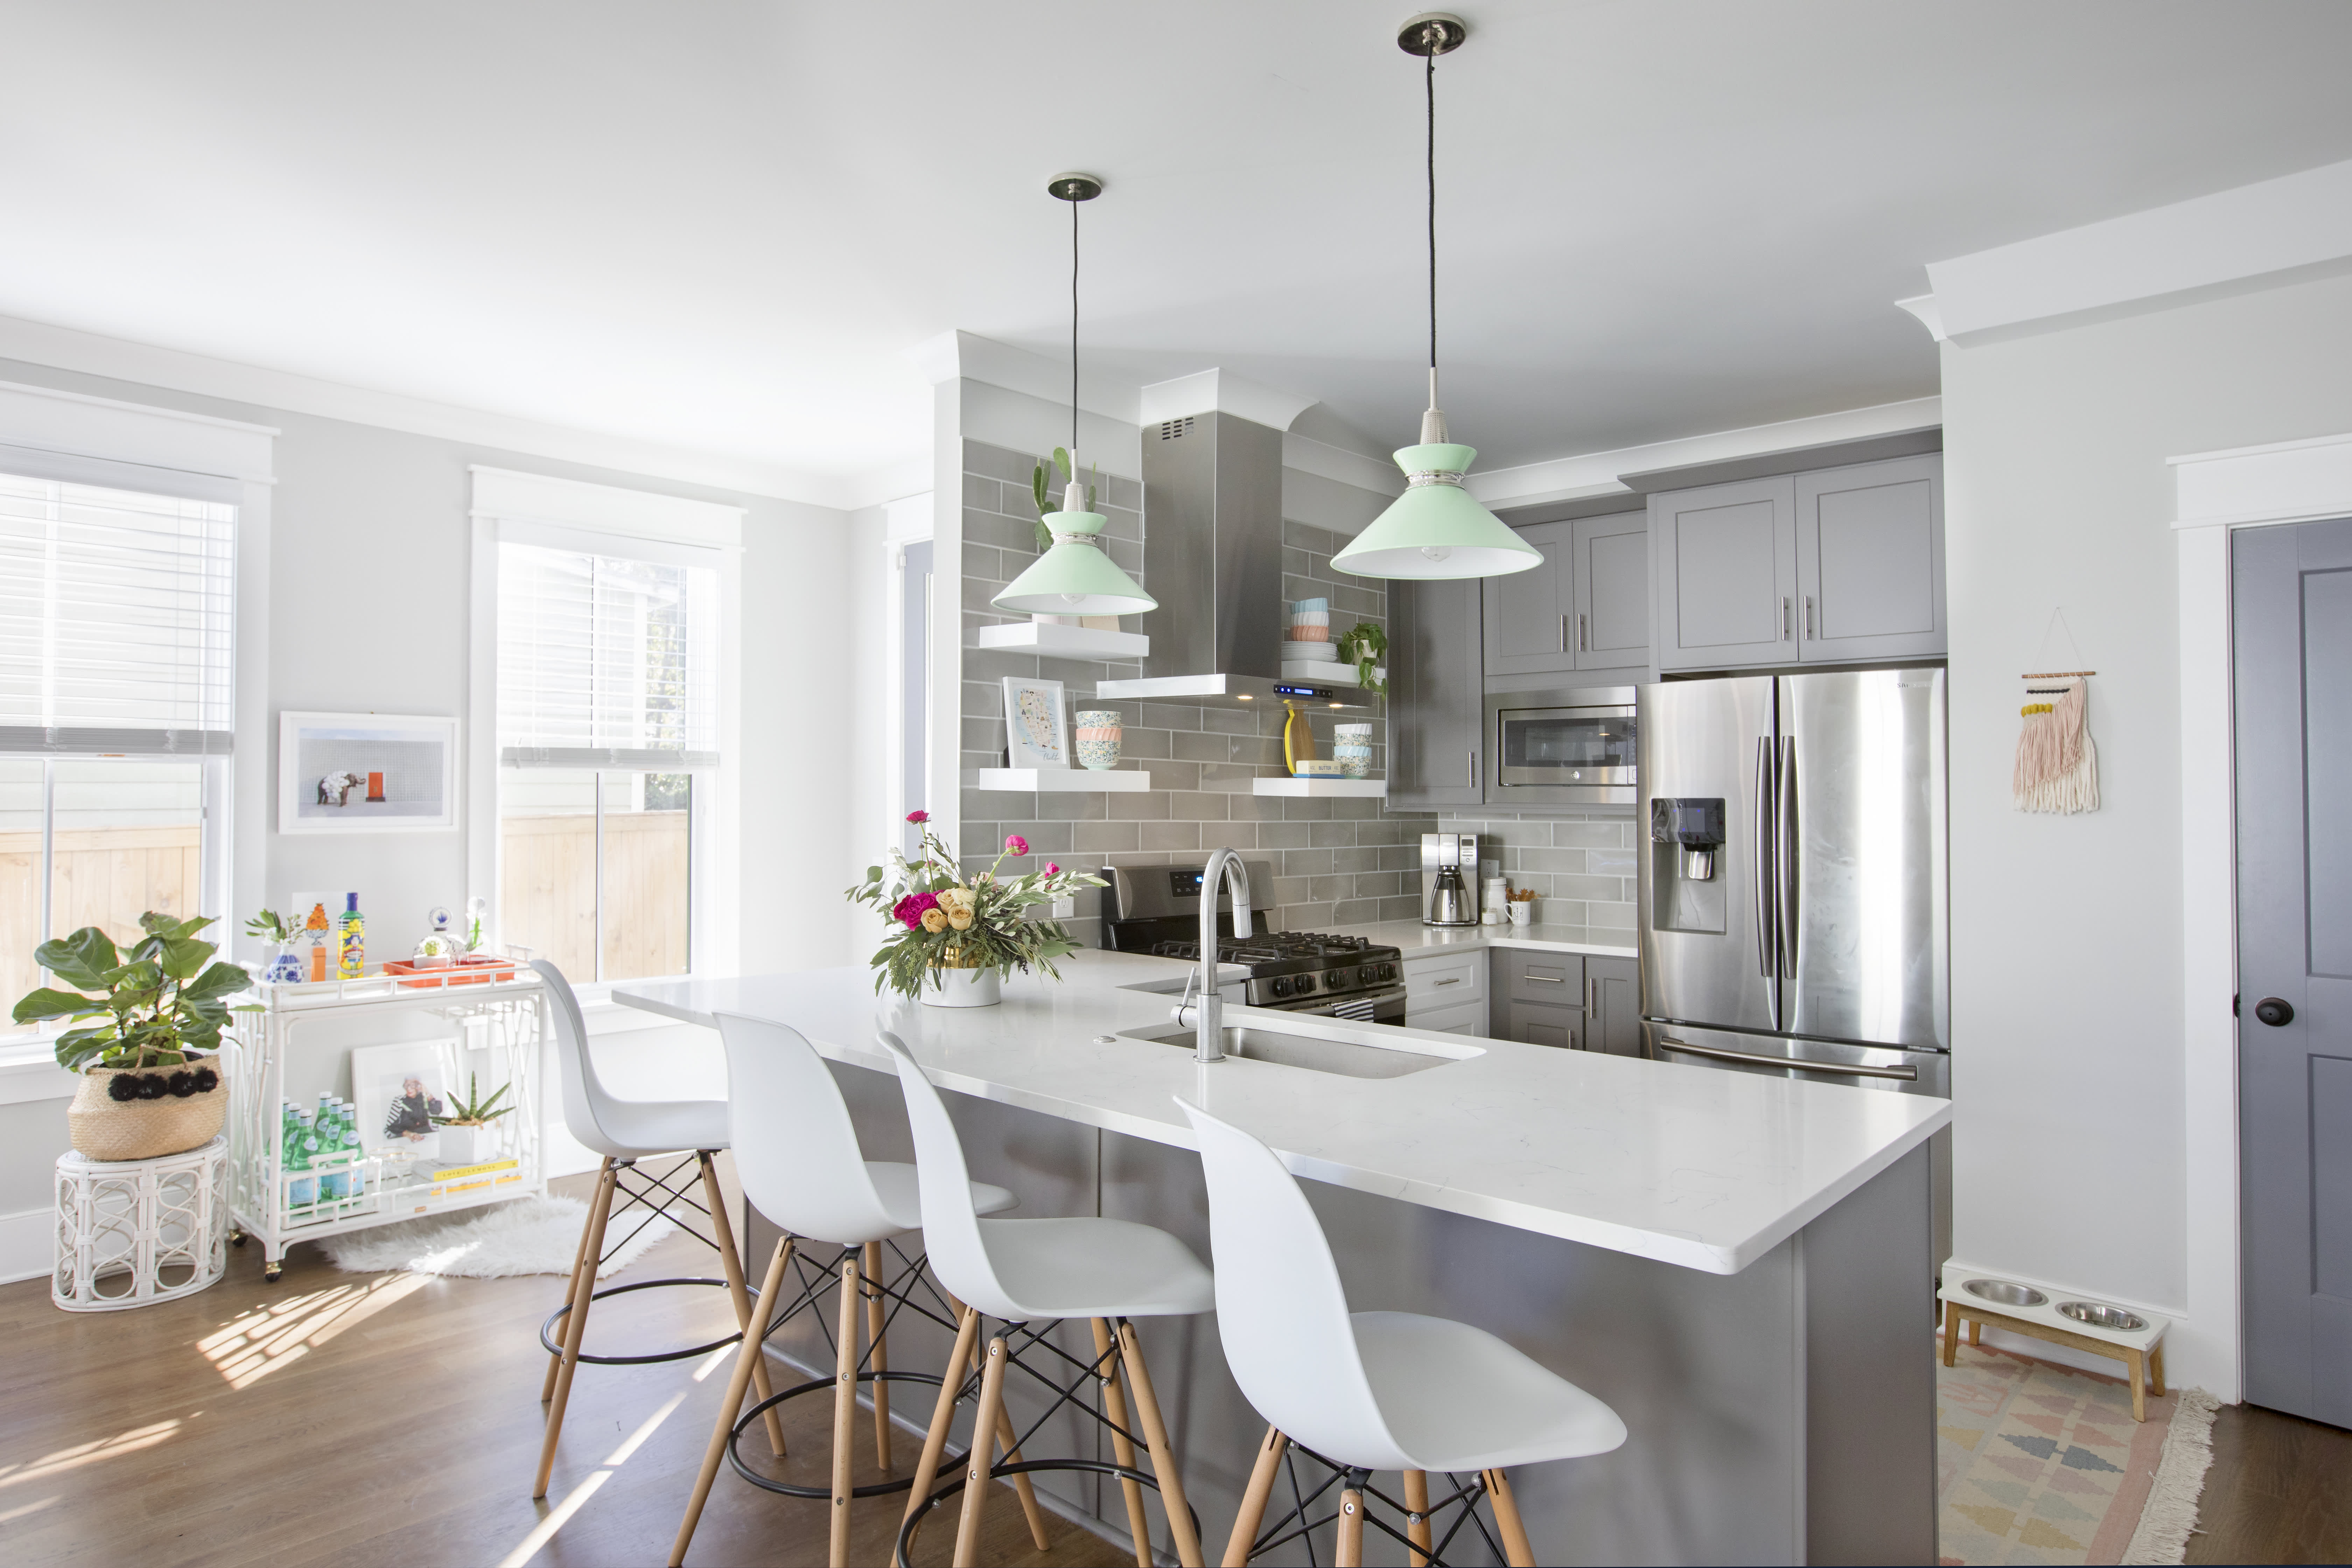 25 Kitchen Design Trends That'll Be Huge in 2025   Kitchn